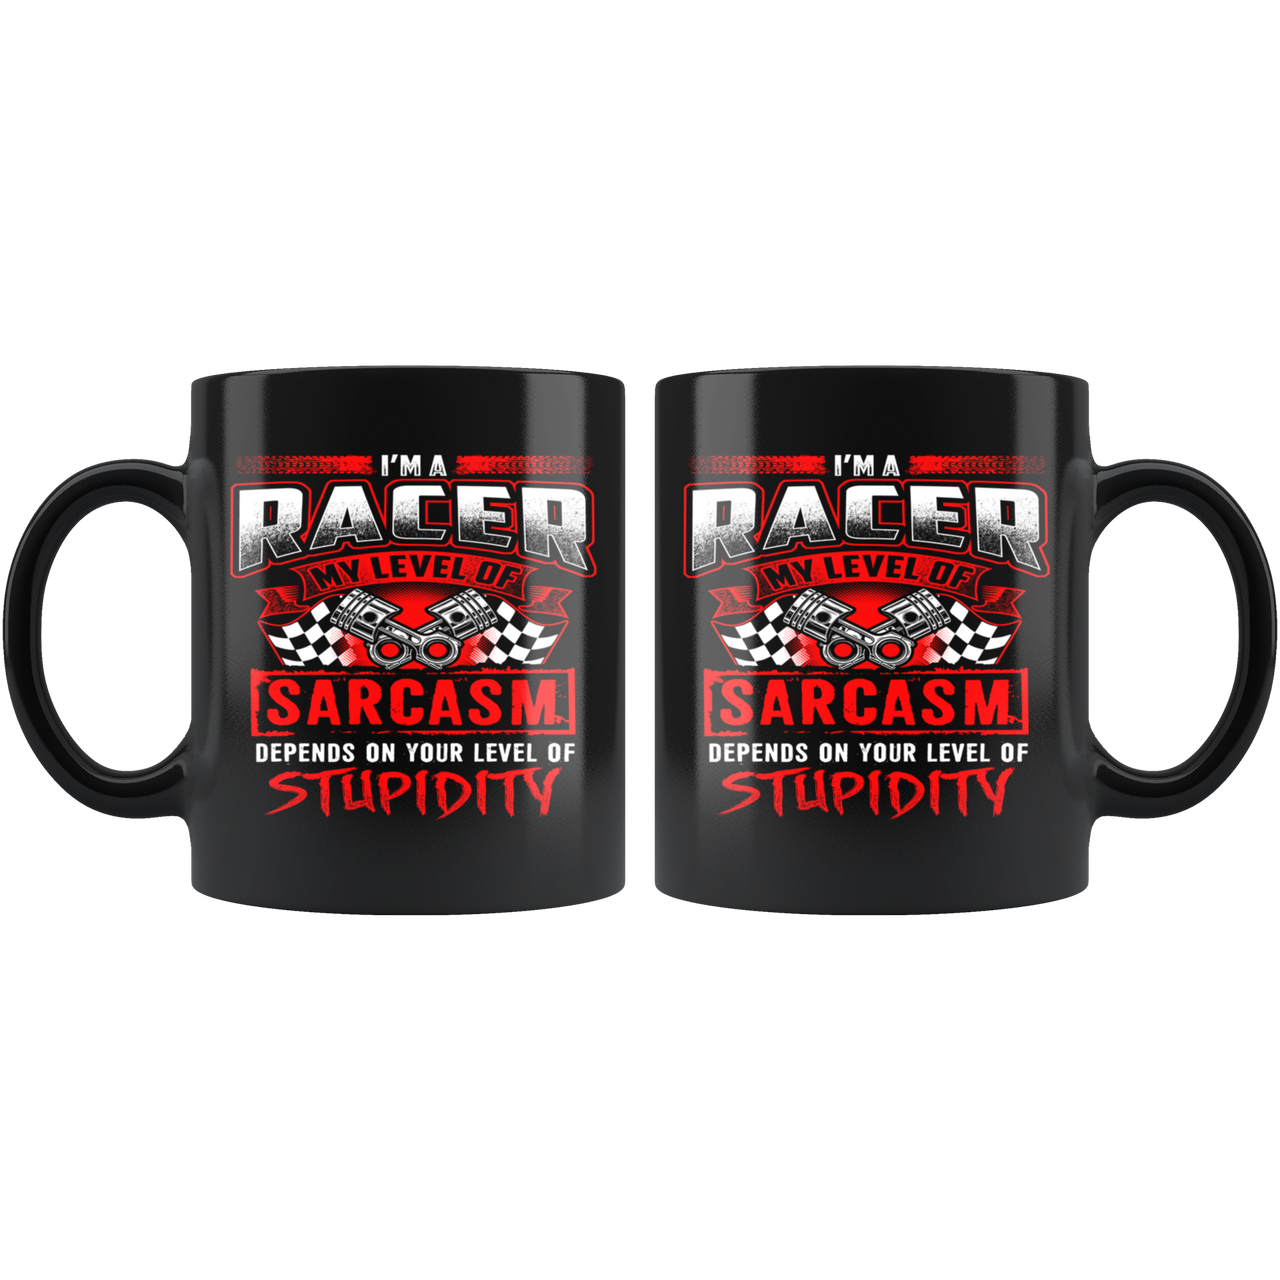 I'm A Racer My Level Of Sarcasm Depends On Your Level of Stupidity Mug!